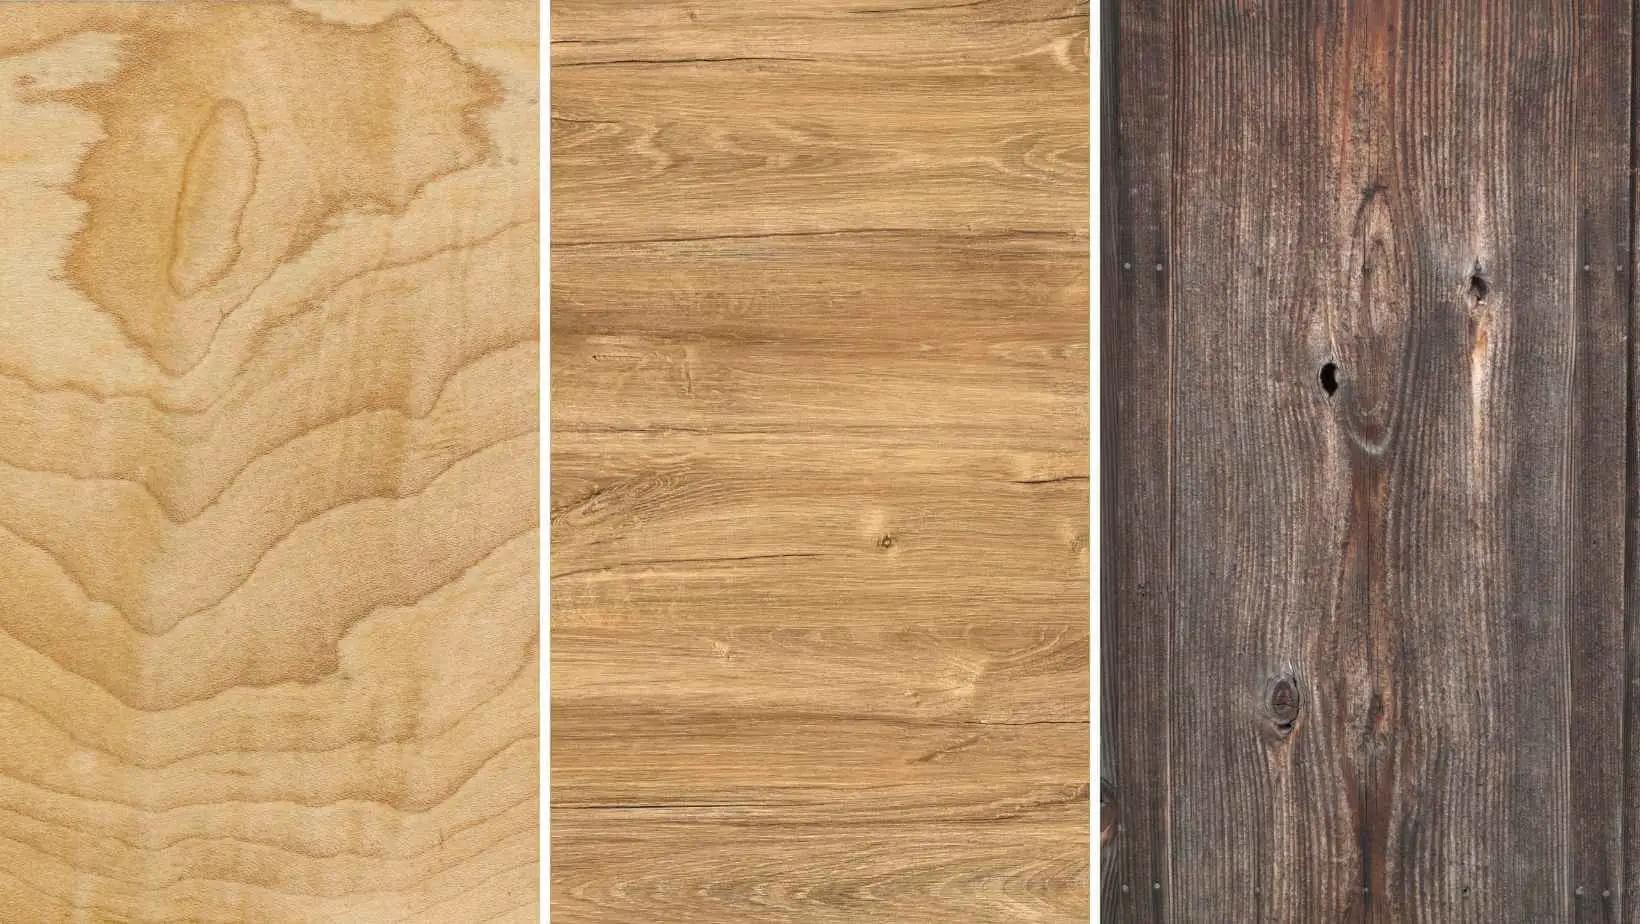 Different types of wood grain patterns